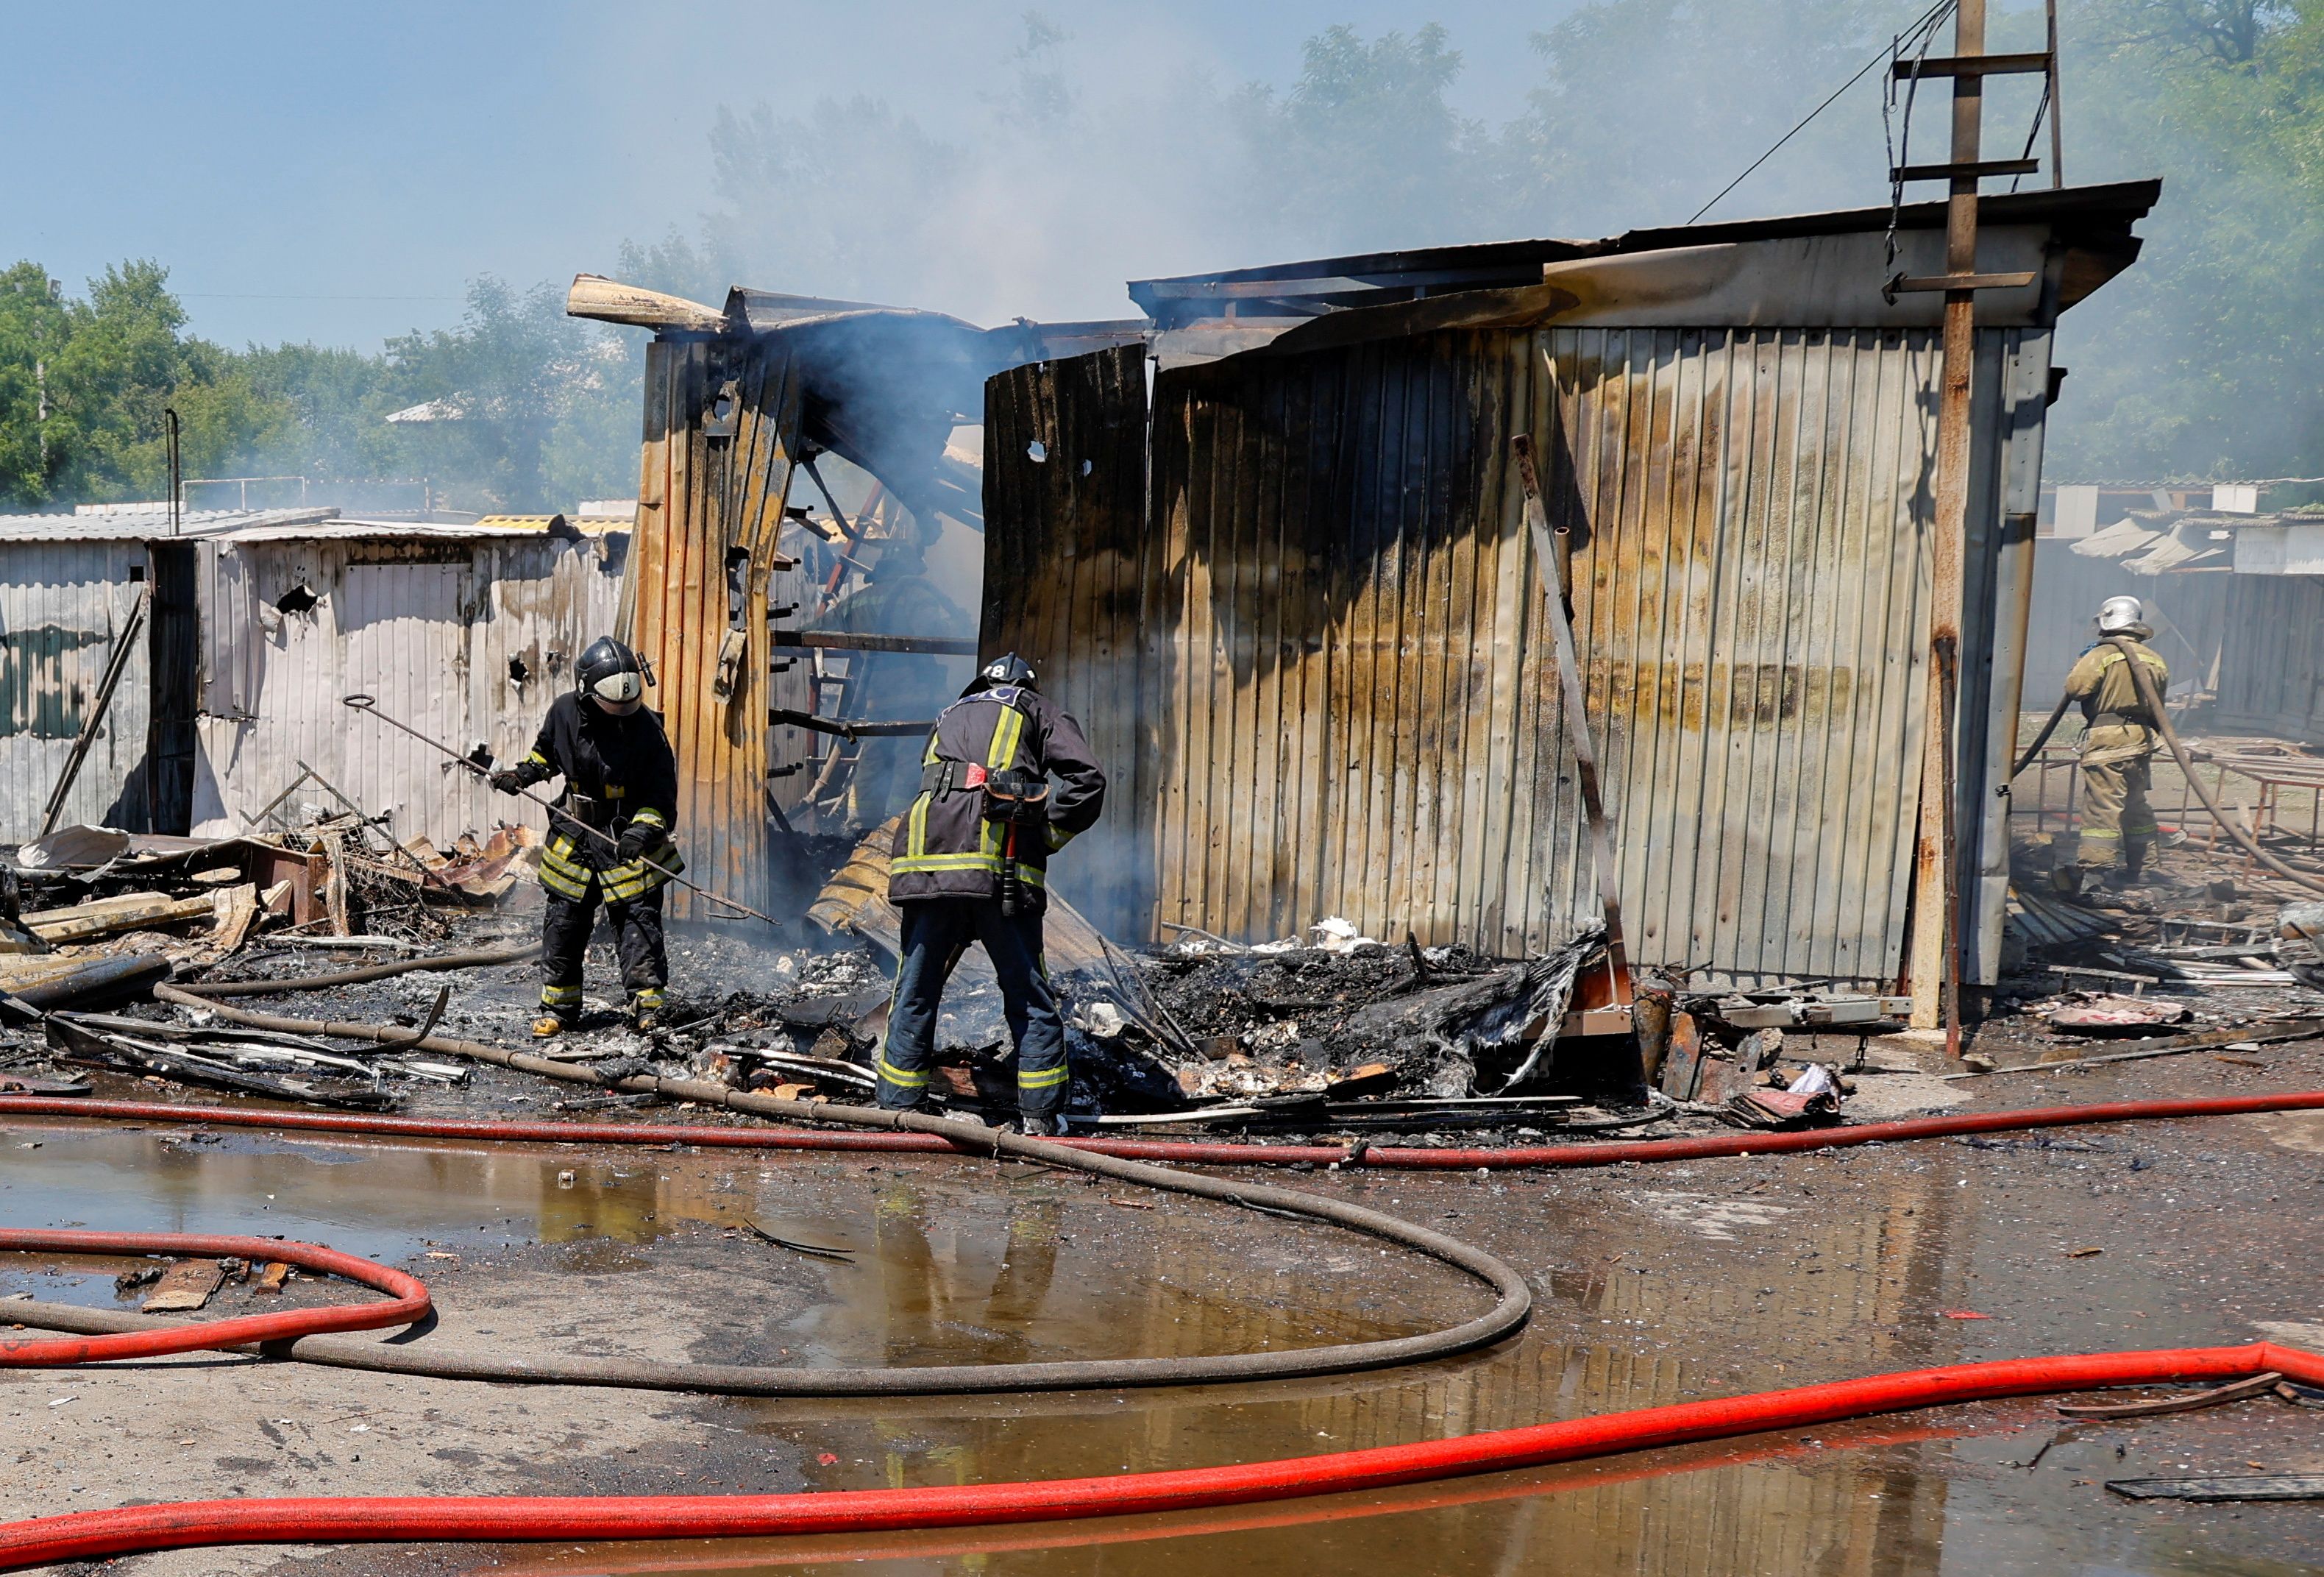 Firefighters extinguish a fire following recent shelling at a market in Donetsk